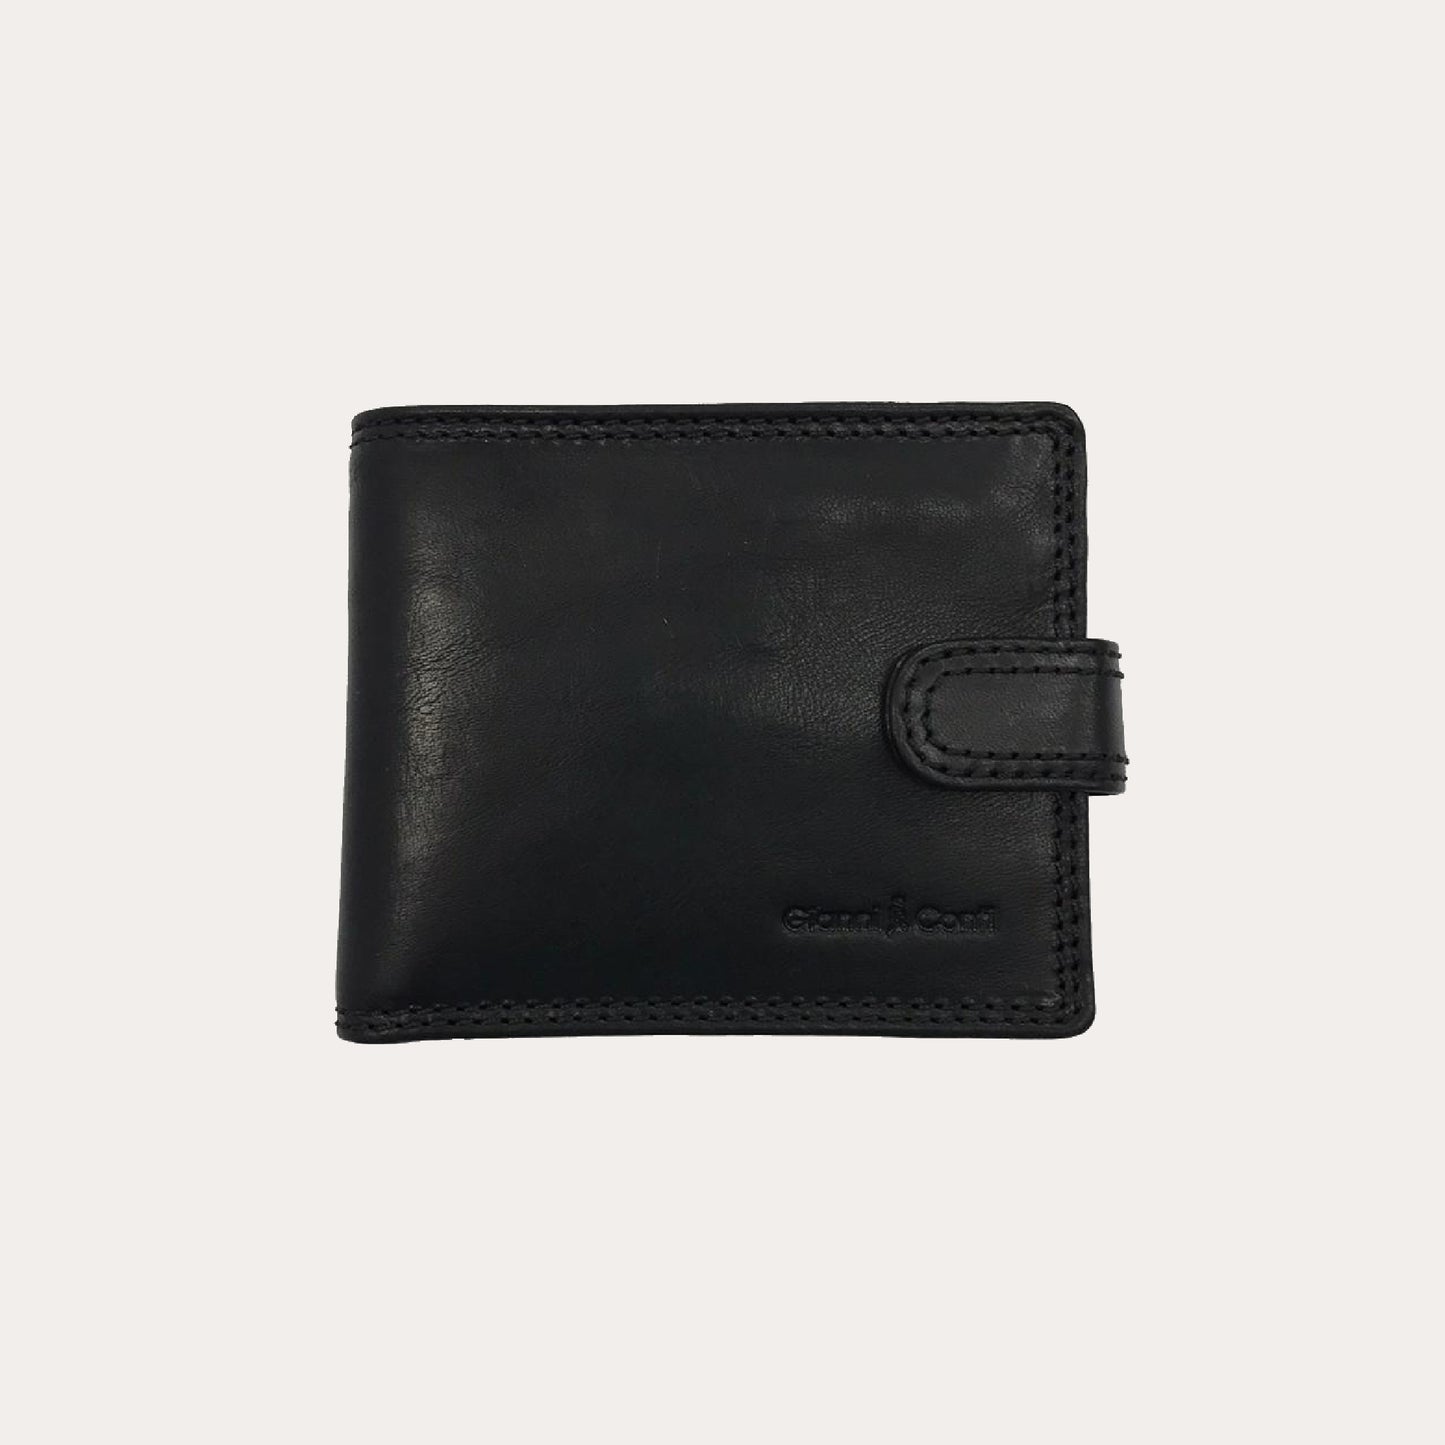 Gianni Conti Black Leather Wallet-7 Credit Card/Coin Section